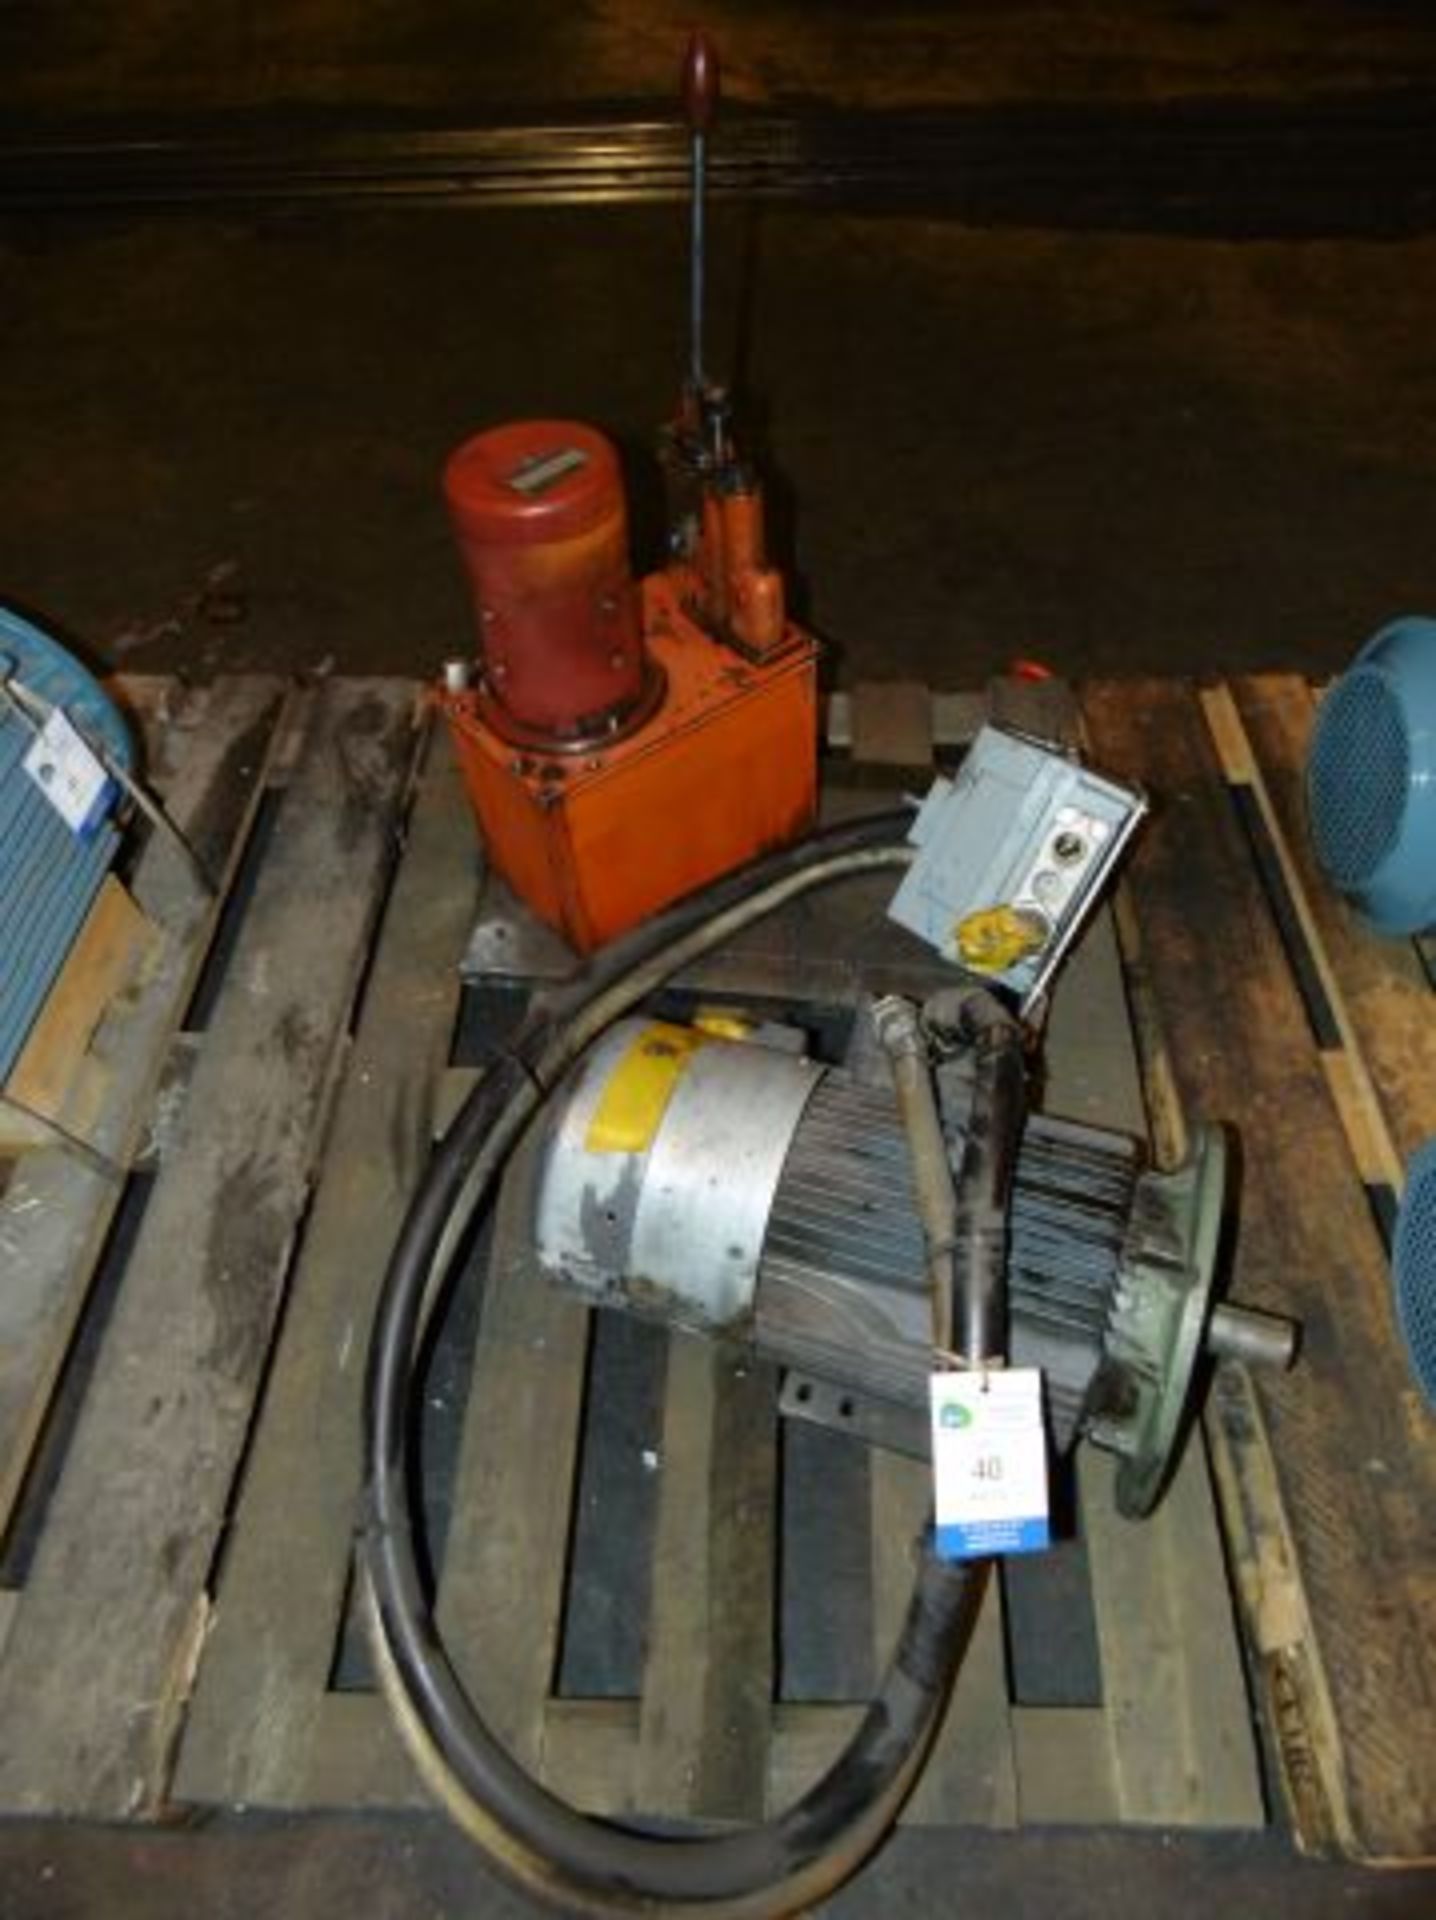 * Hagglunds Type MTL 9-7A Hydraulic Pump and Electric Motor. Loaded onto Buyer's Transport